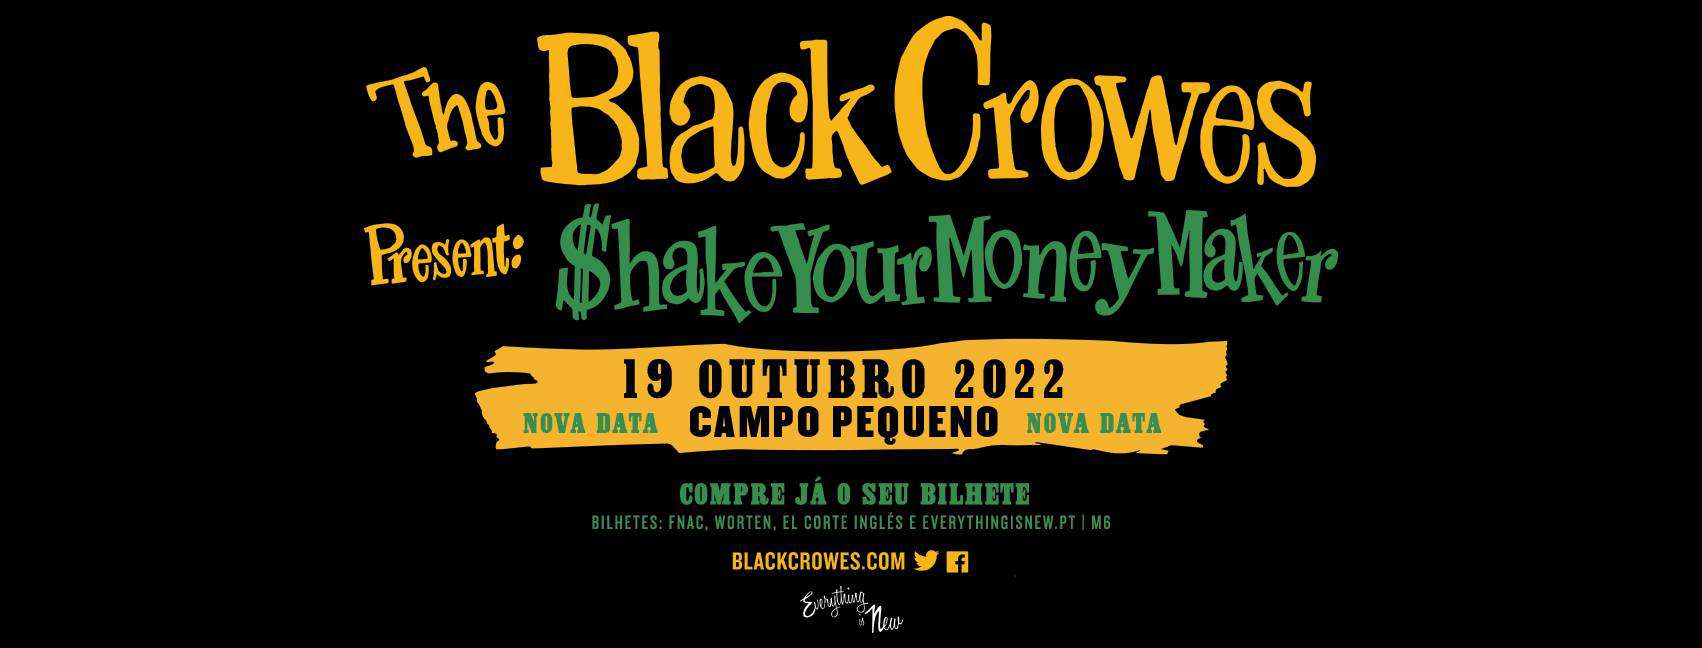 The Black Crowes - Campo Pequeno